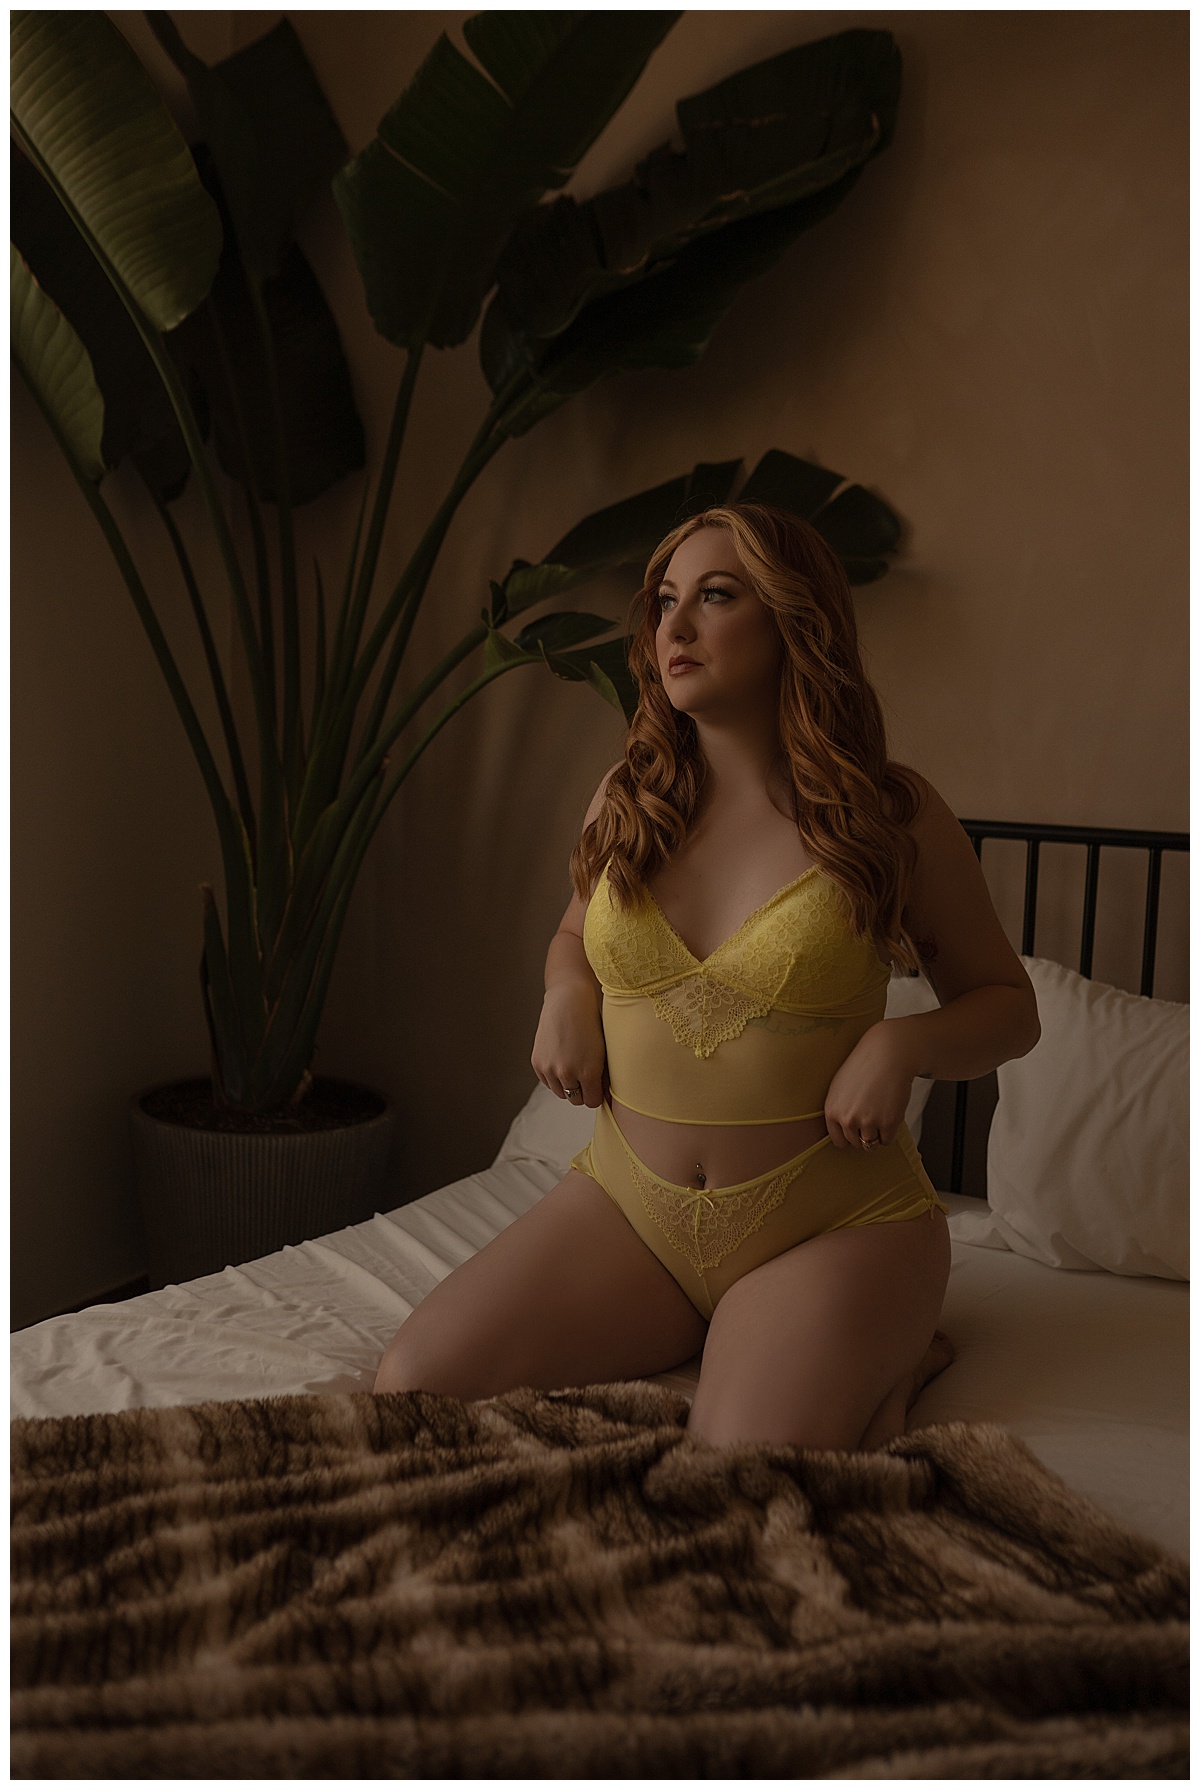 Woman wears yellow lingerie to Practice Body Positivity